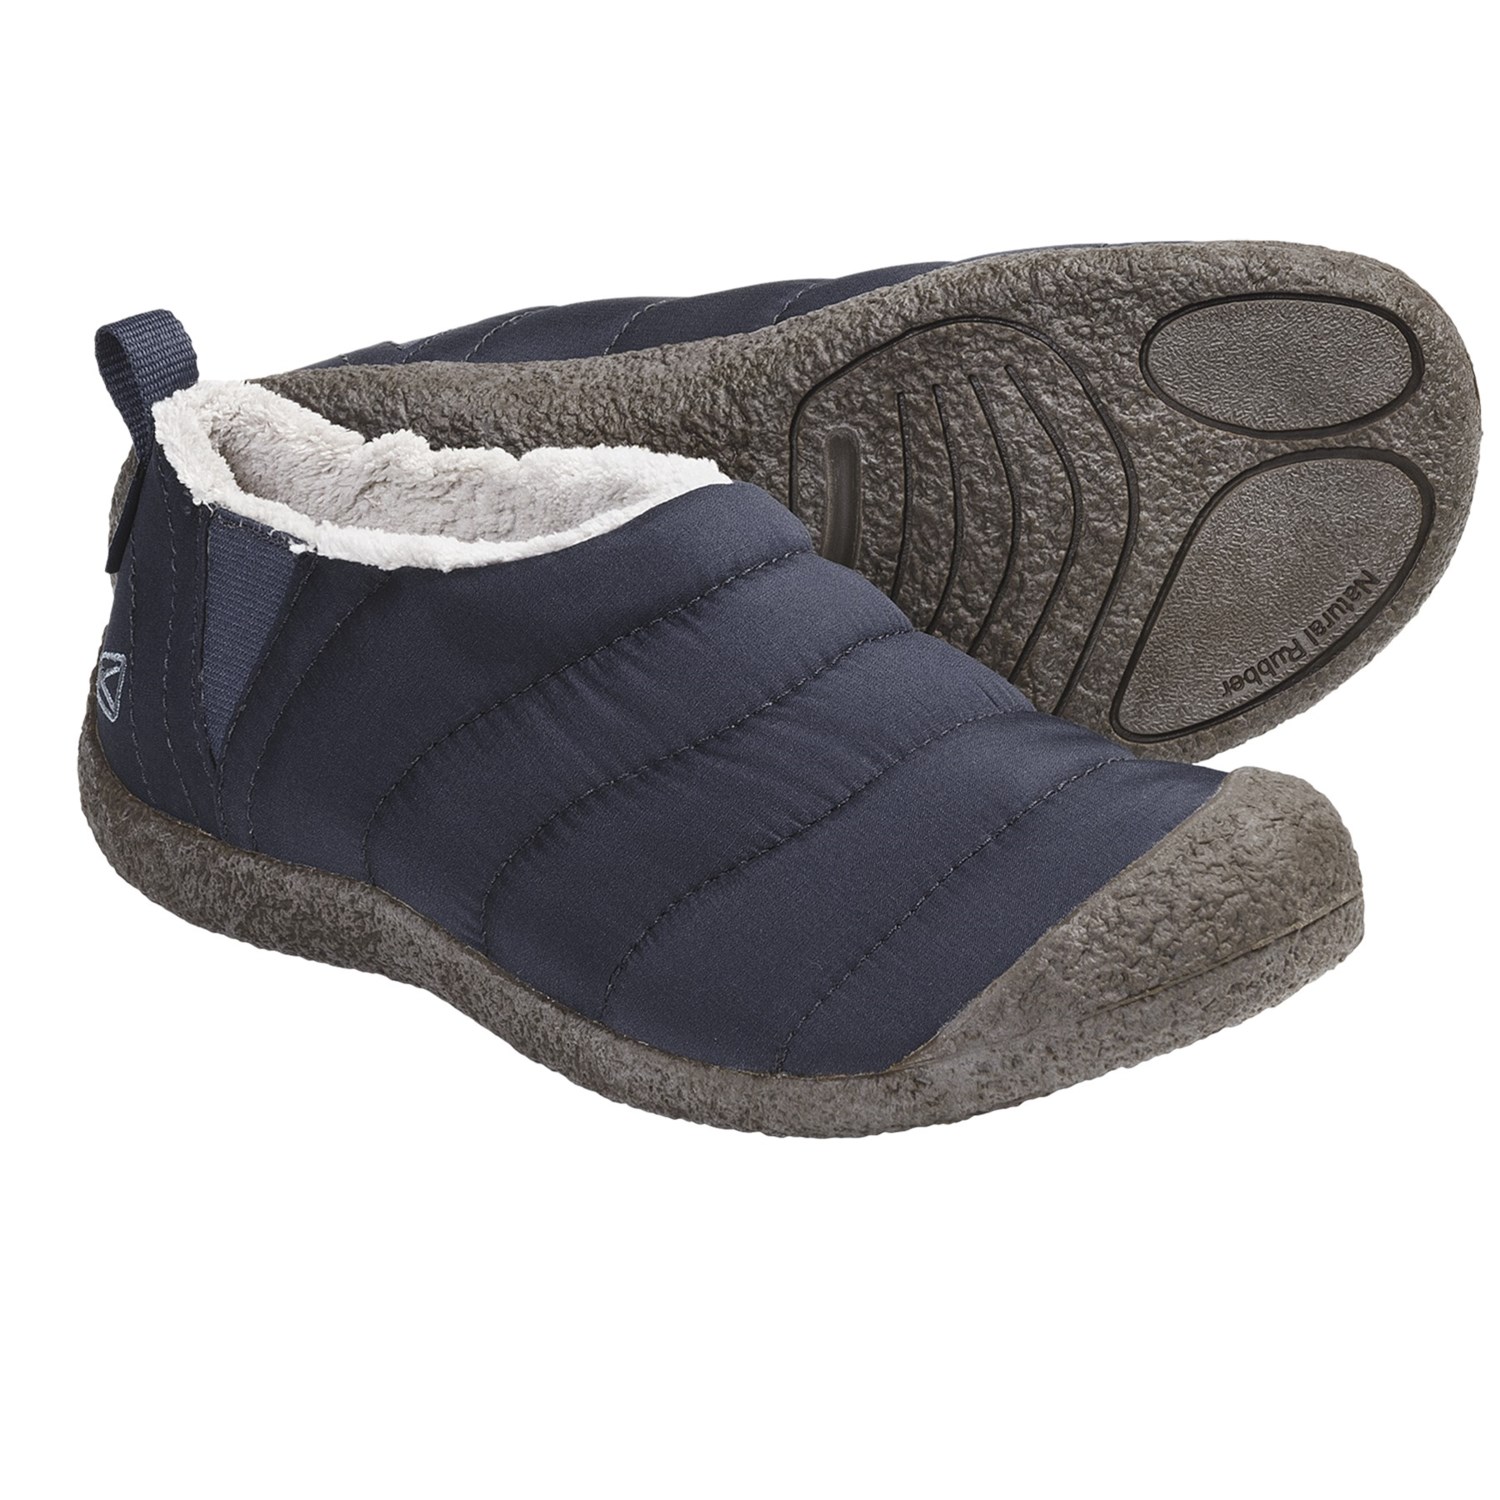 Keen Howser Slipper Shoes (For Men) 4871P - Save 30%